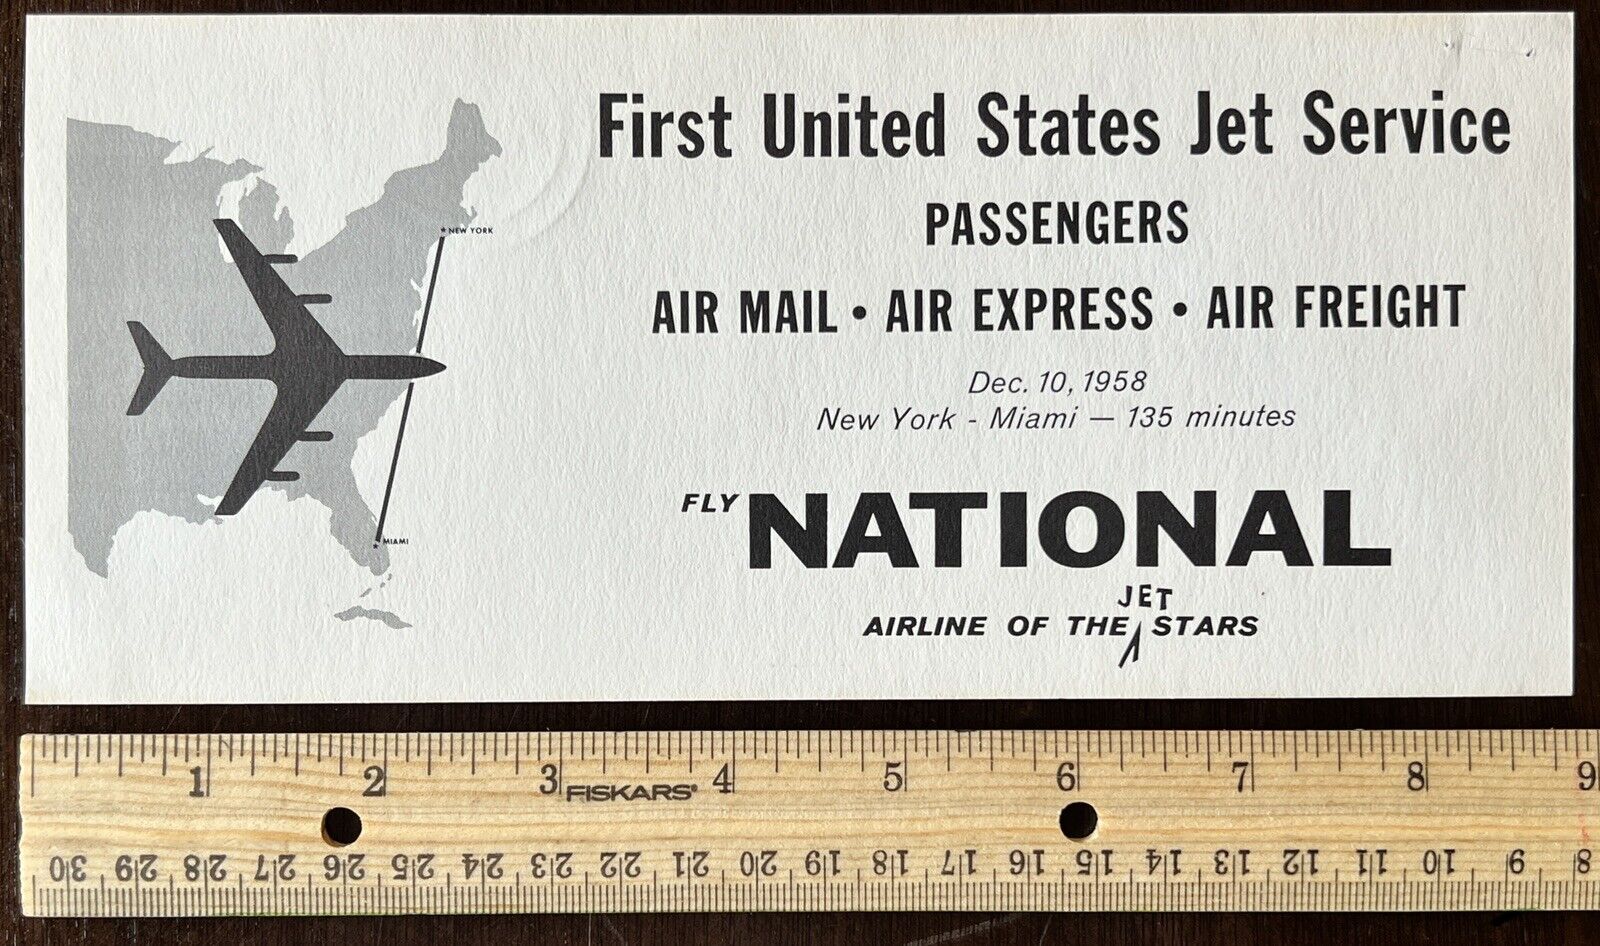 RARE 1958 FLY NATIONAL AIRLINE OF THE JET STARS 1ST U.S. JET SERVICE ADVERTISING